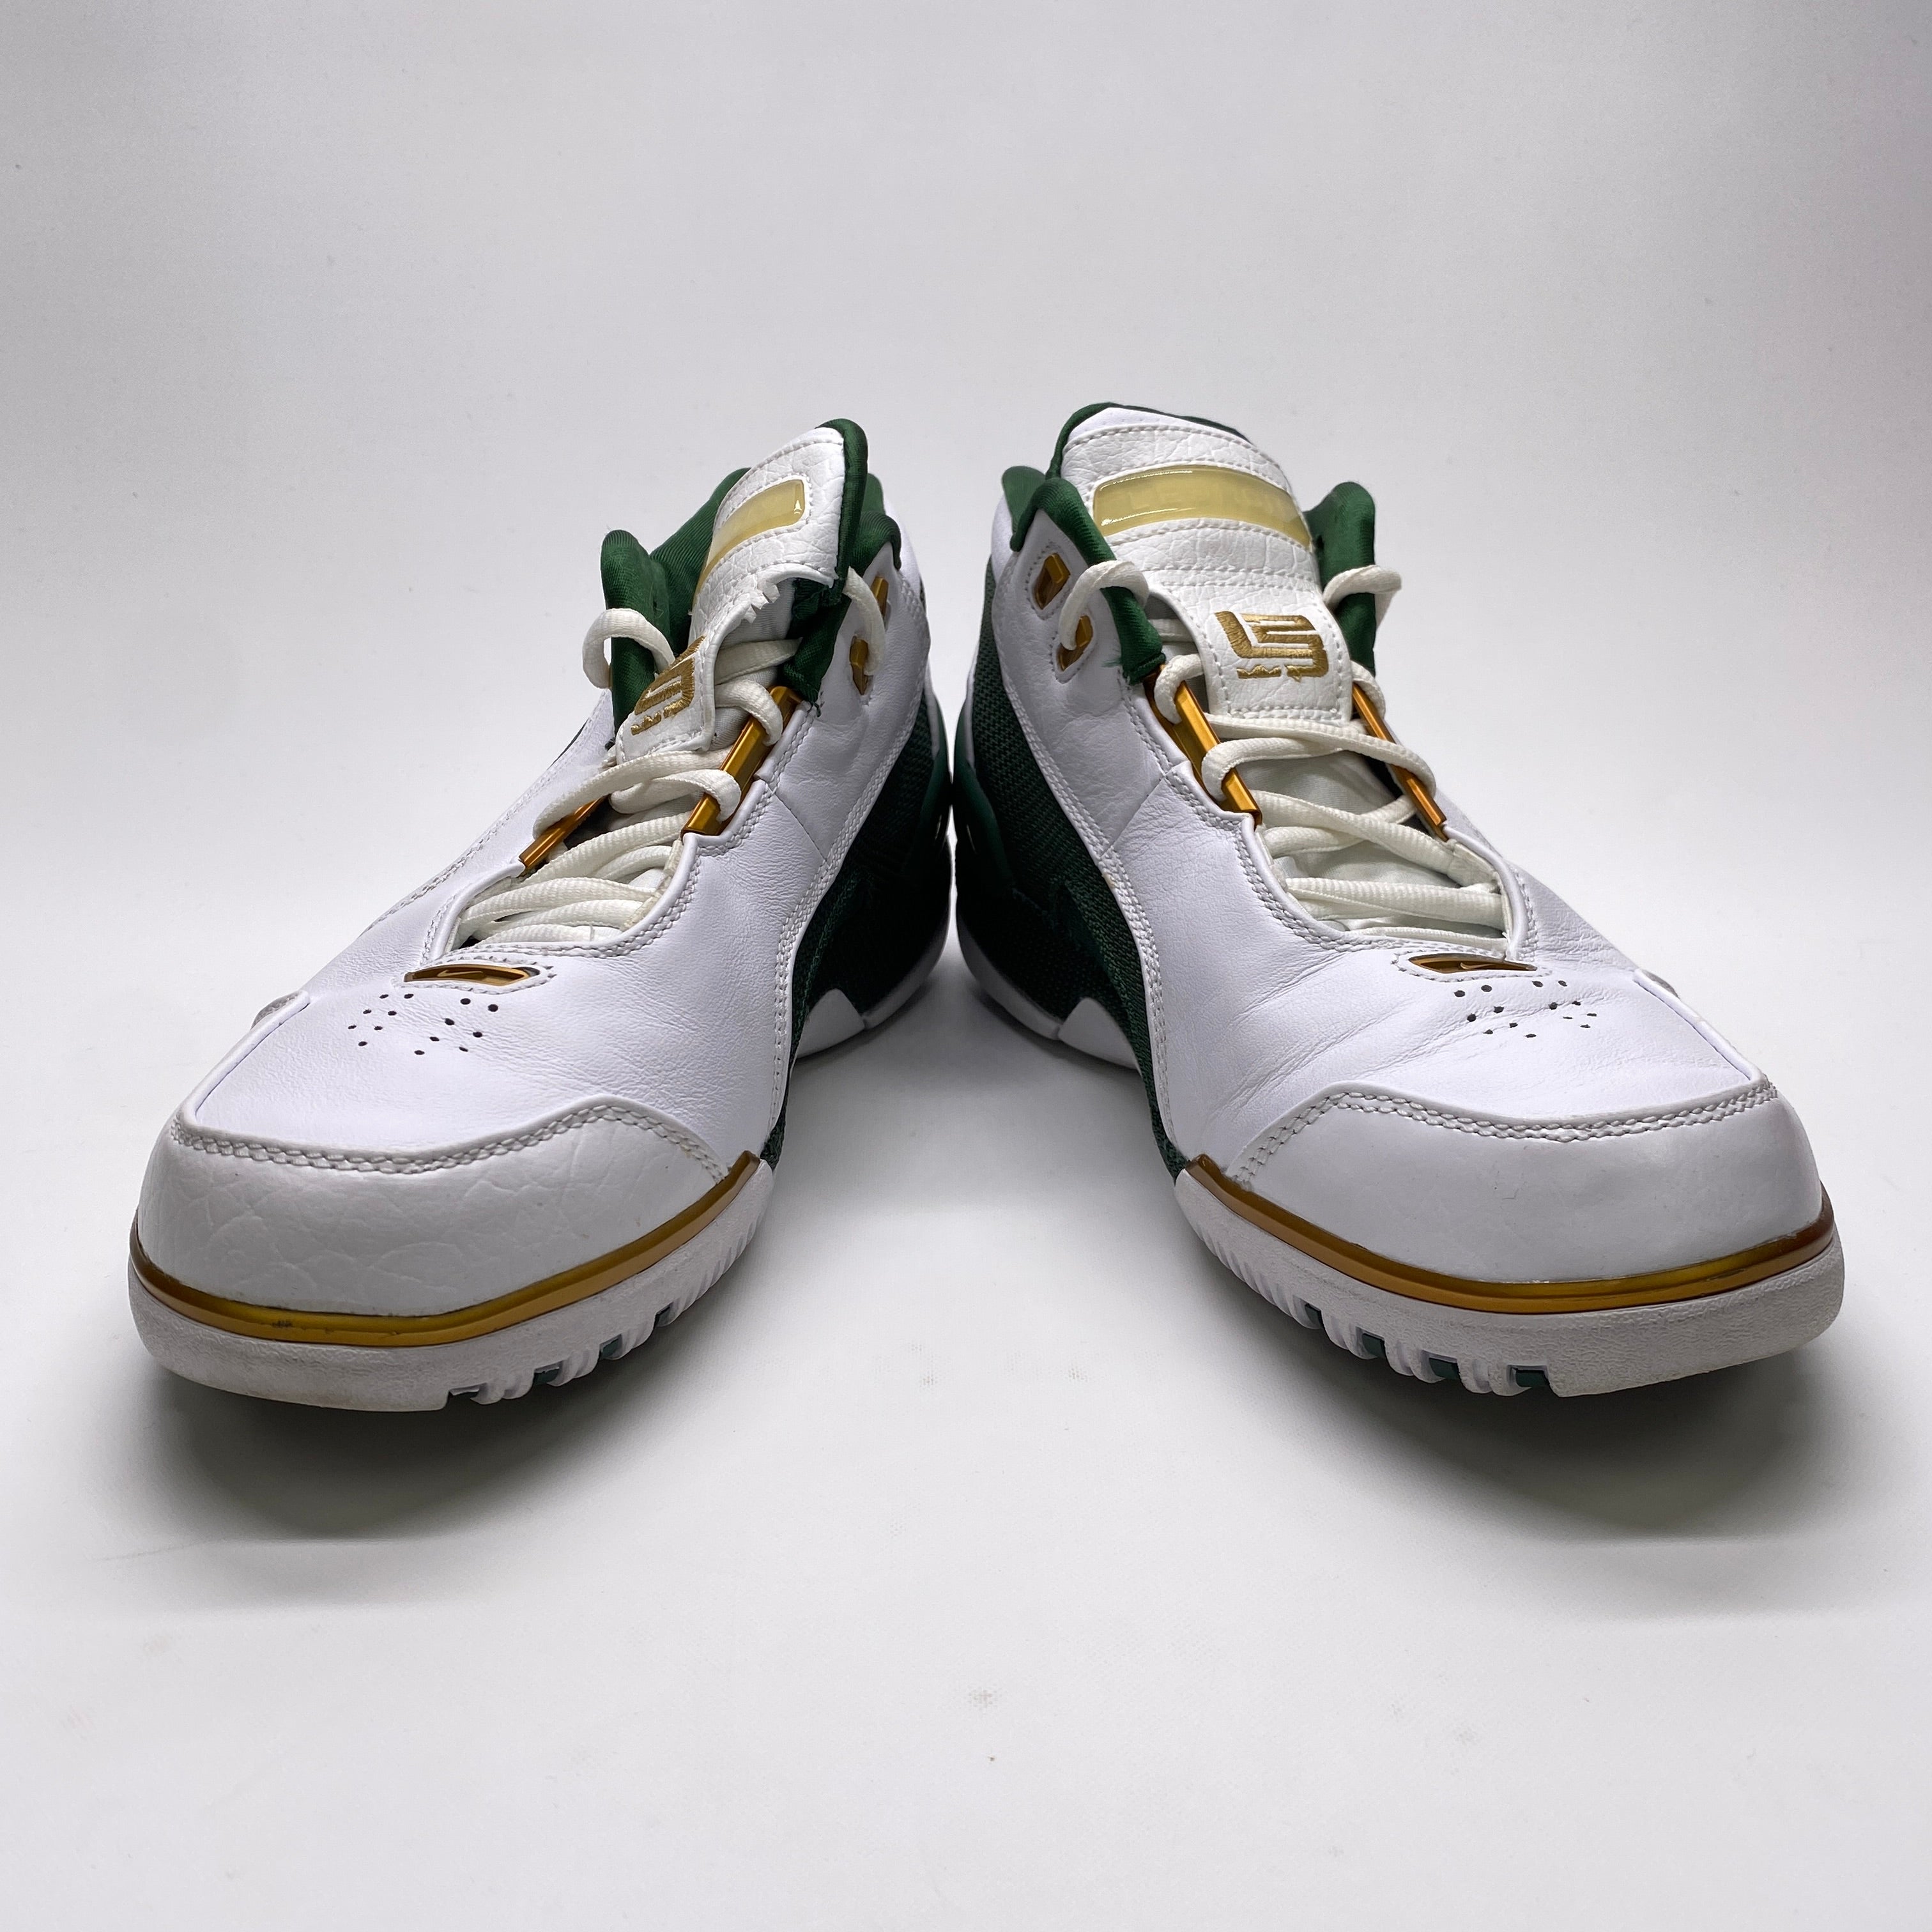 Nike Air Zoom Generation "Svsm" 2018 Used Size 9